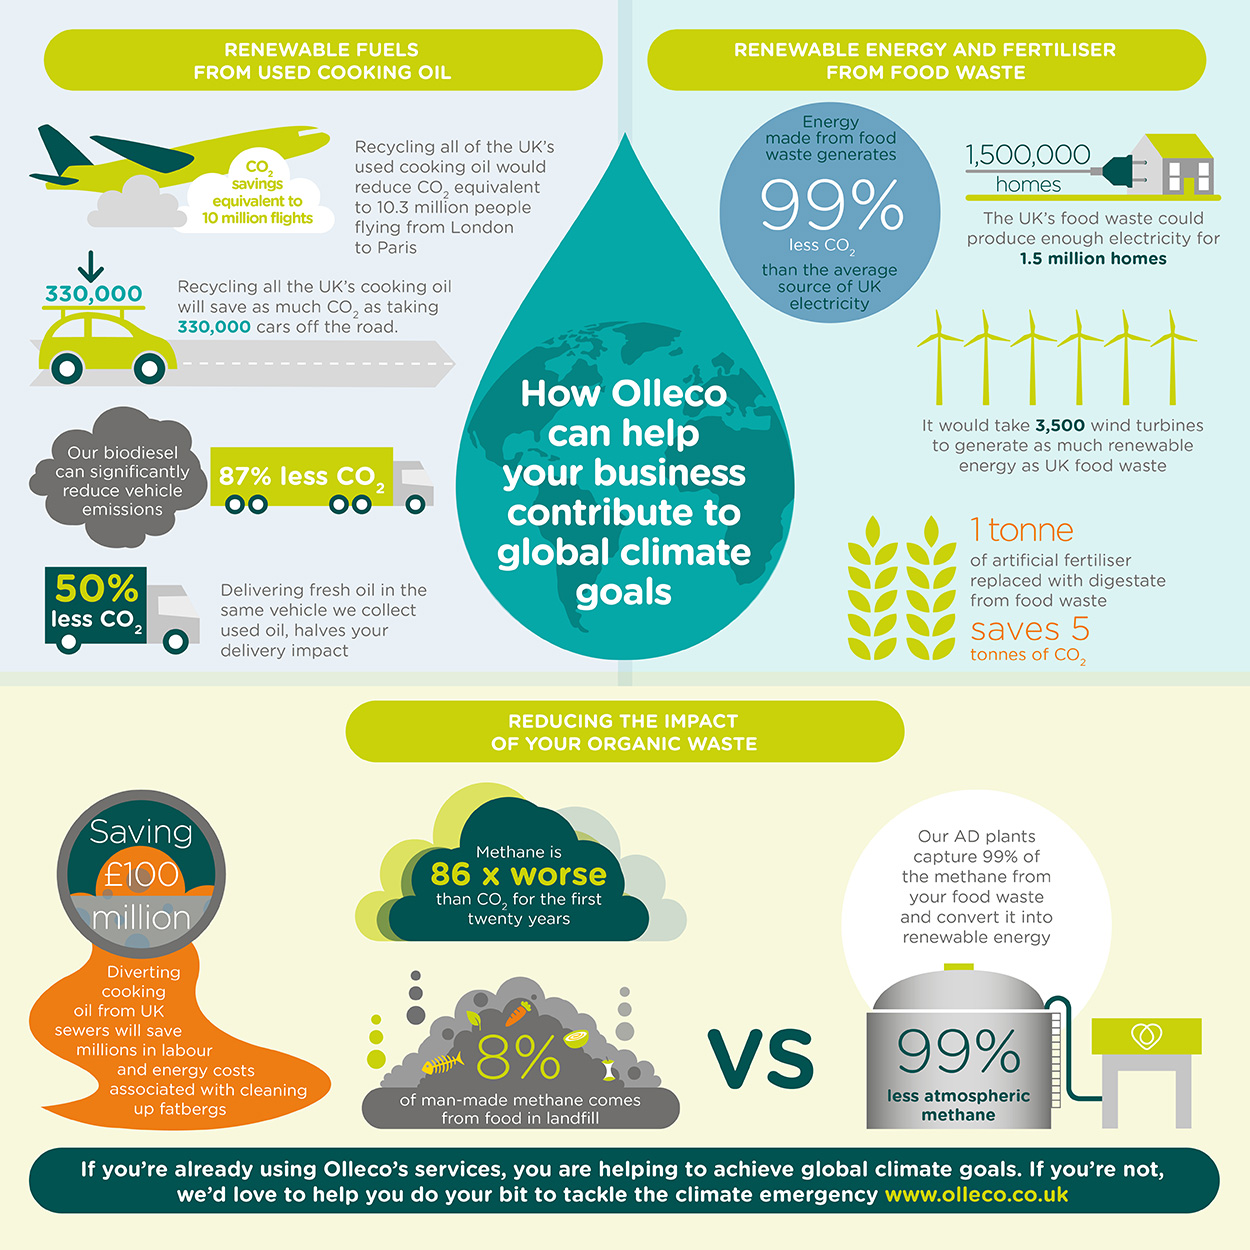 How Olleco can help business contribute to global climate goals infographic